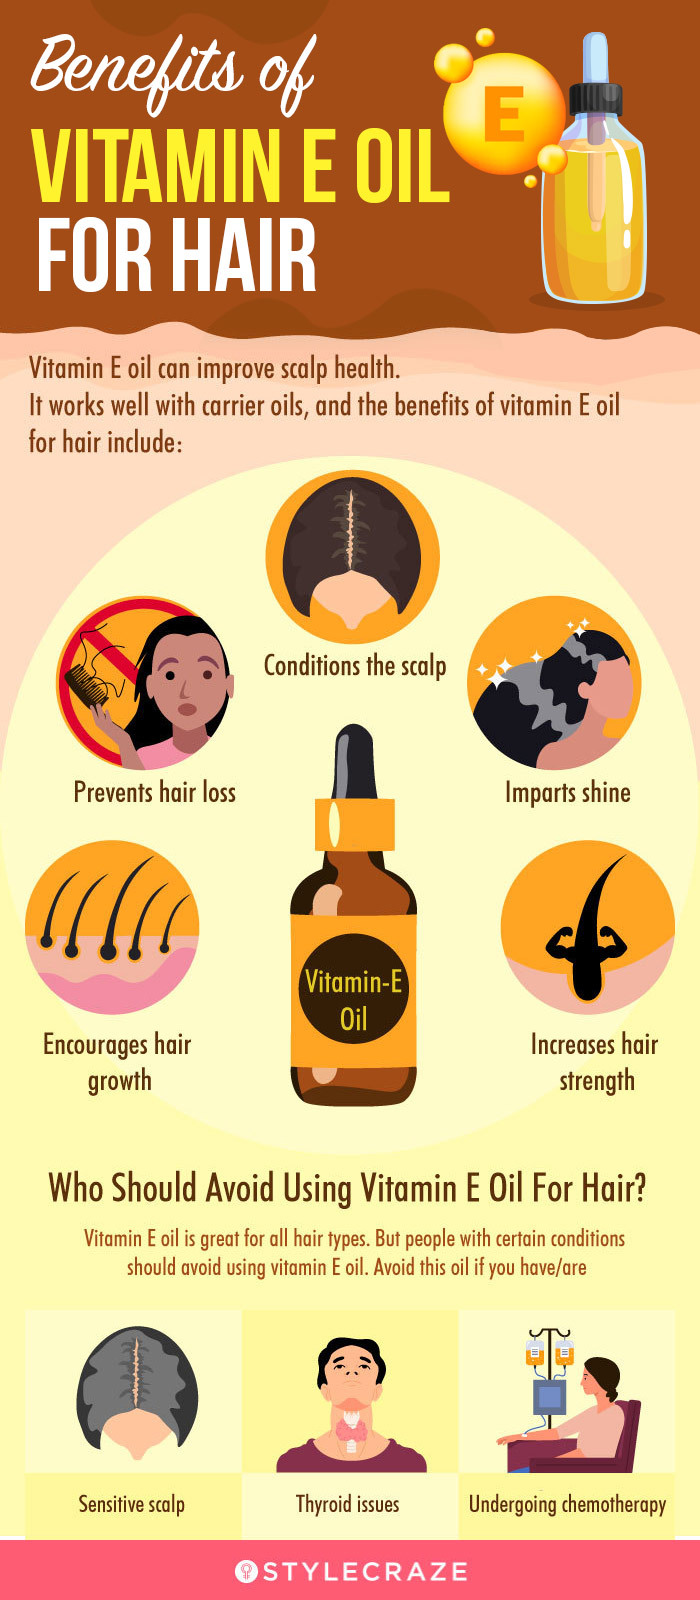 3 Benefits Of Vitamin E For Hair, How To Use, & Side Effects